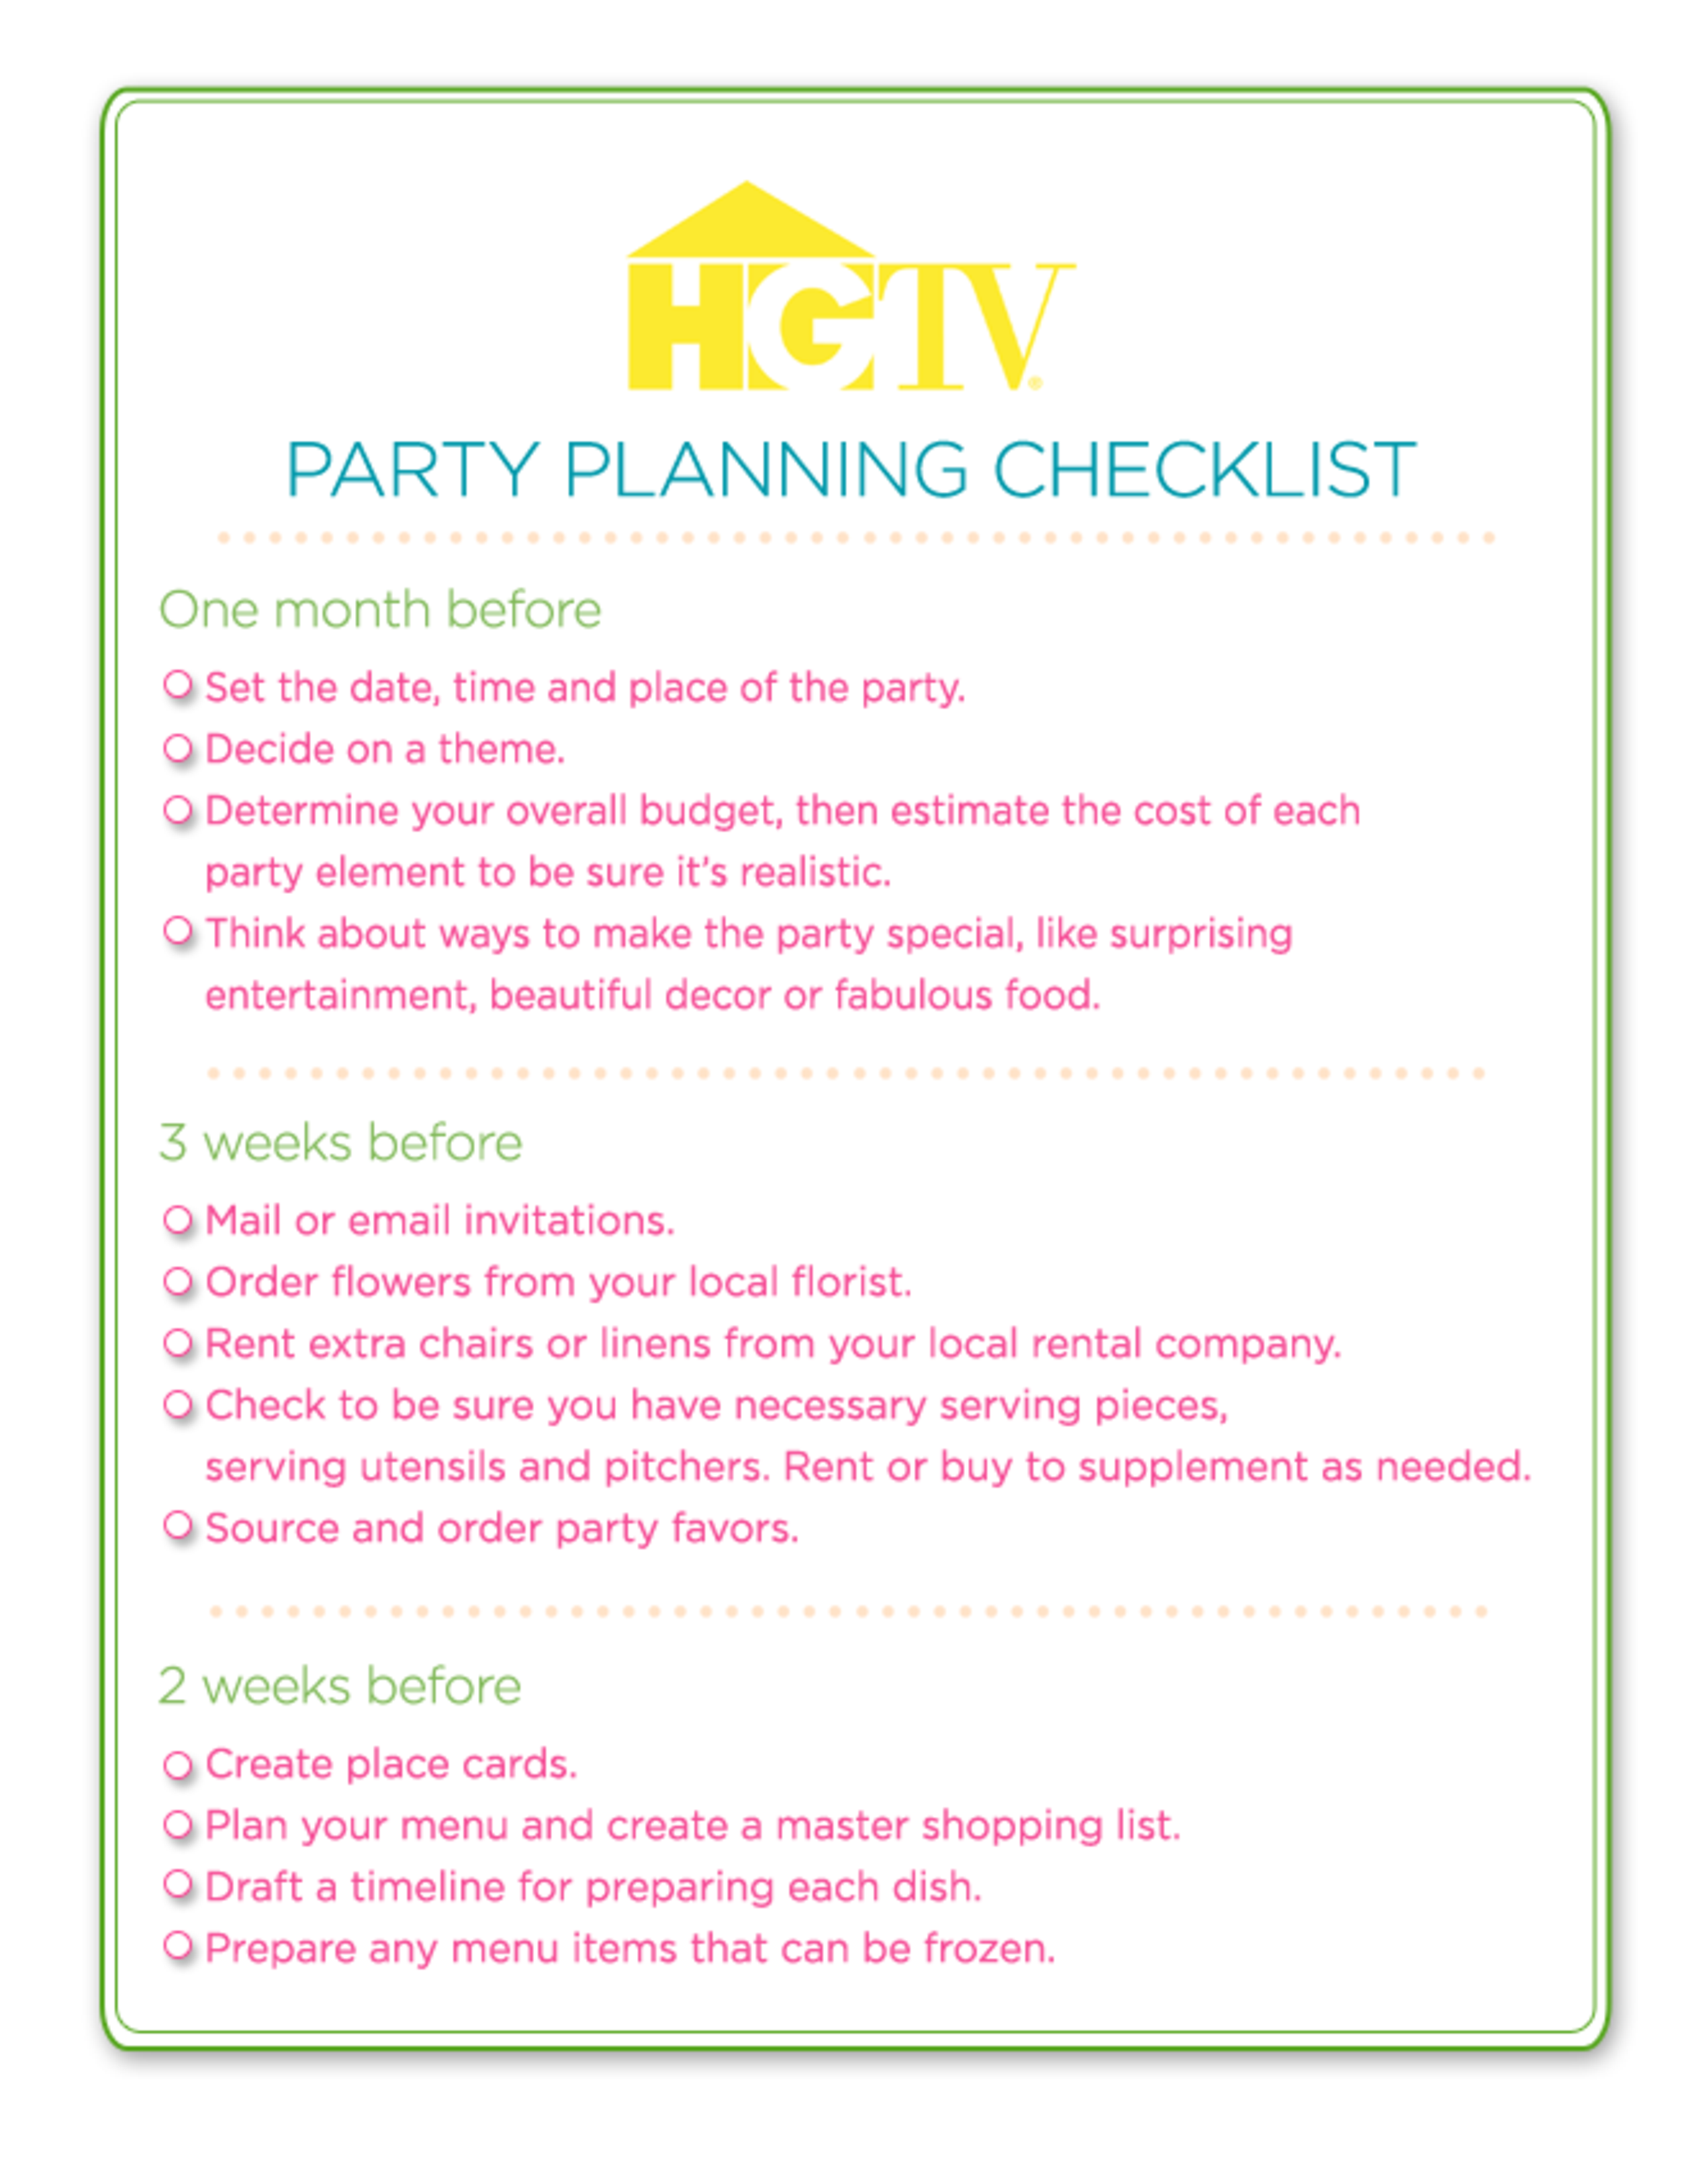 Party Planning Checklist template main image